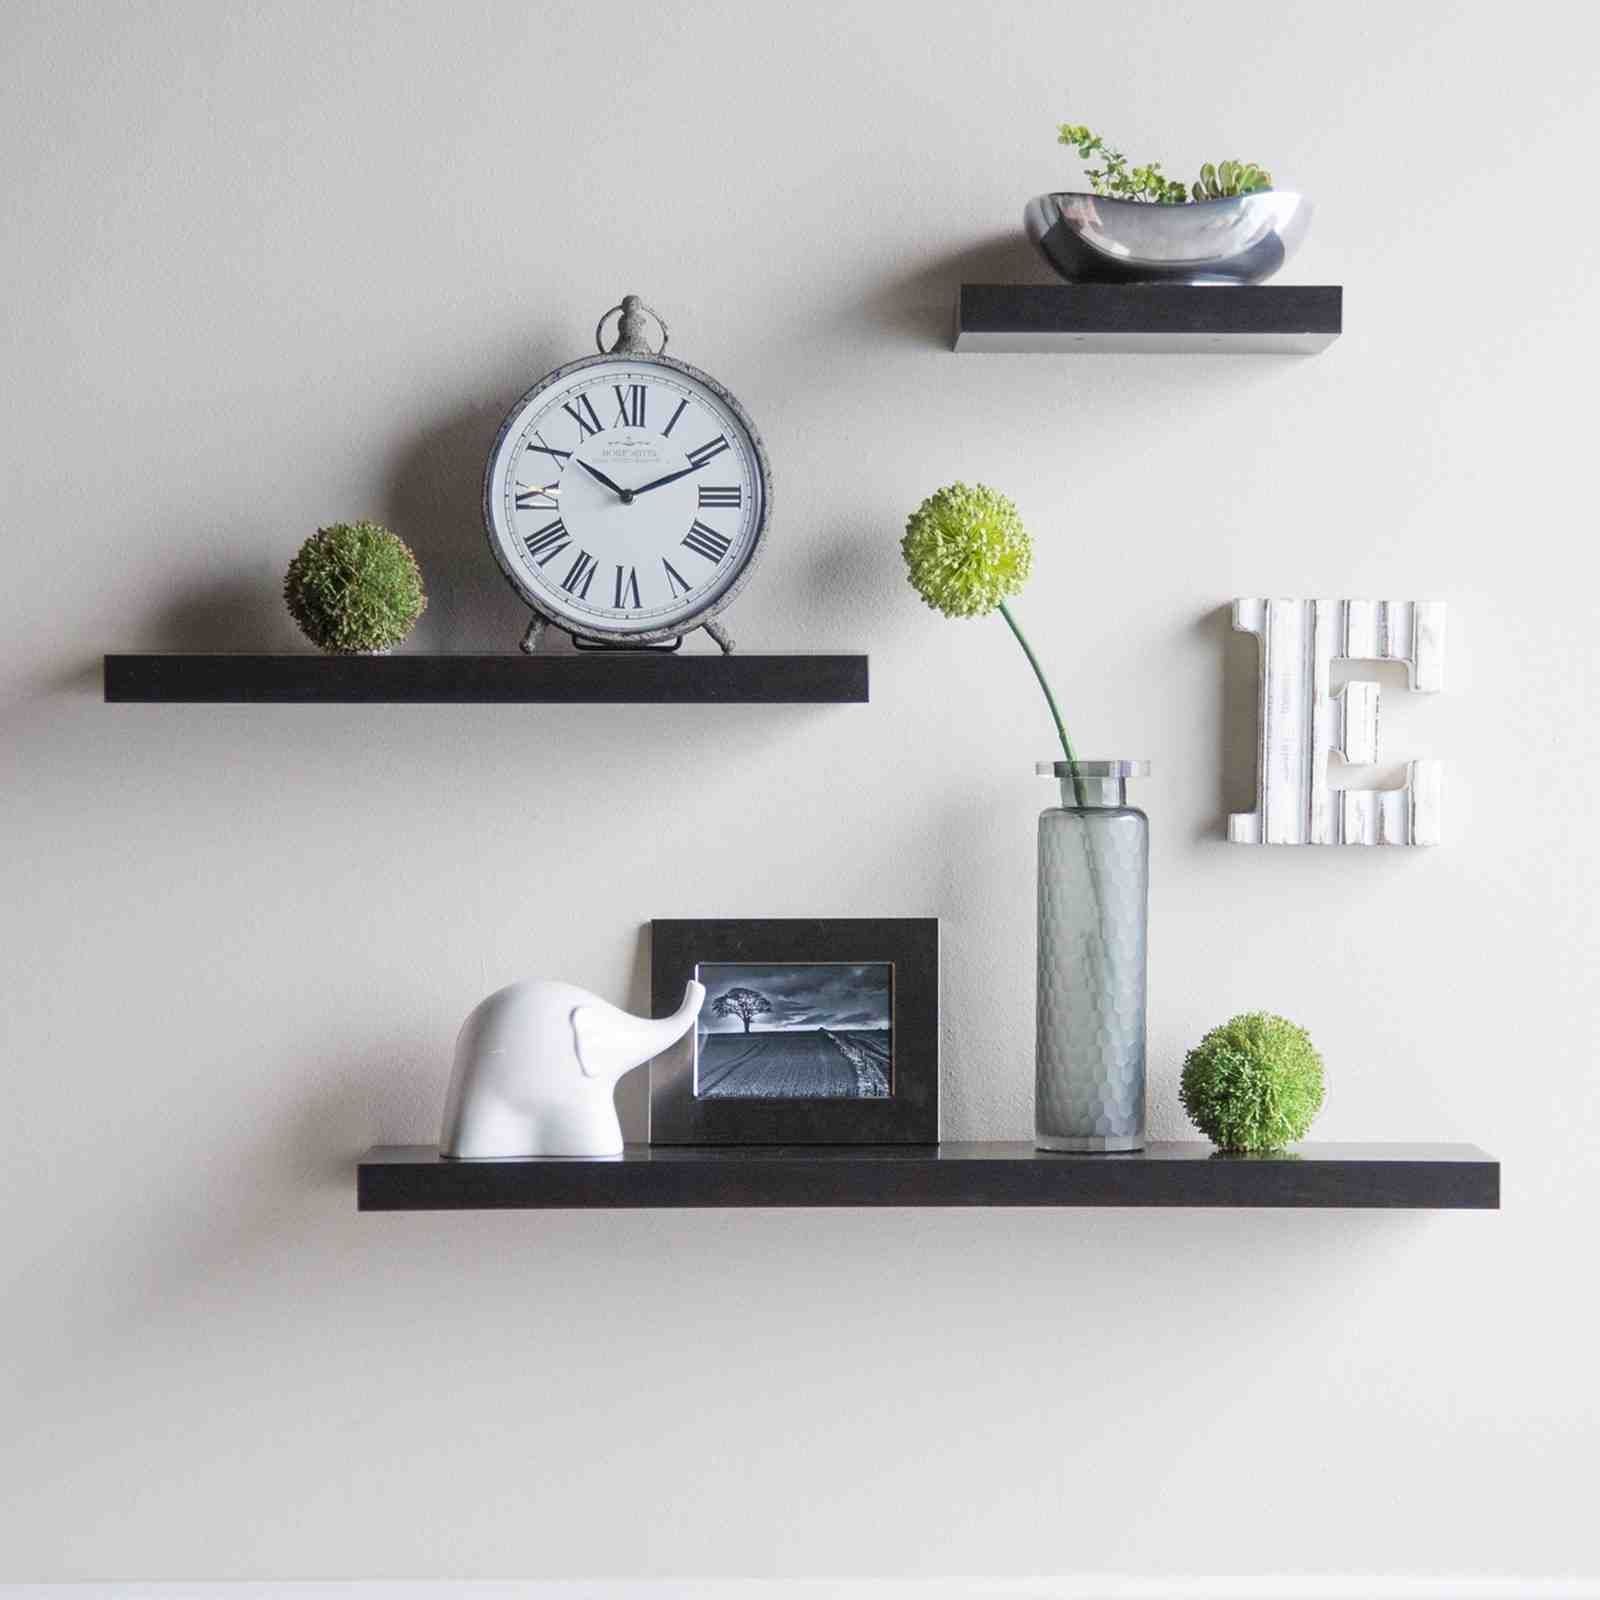 Popular Photo of Floating Wall Shelves